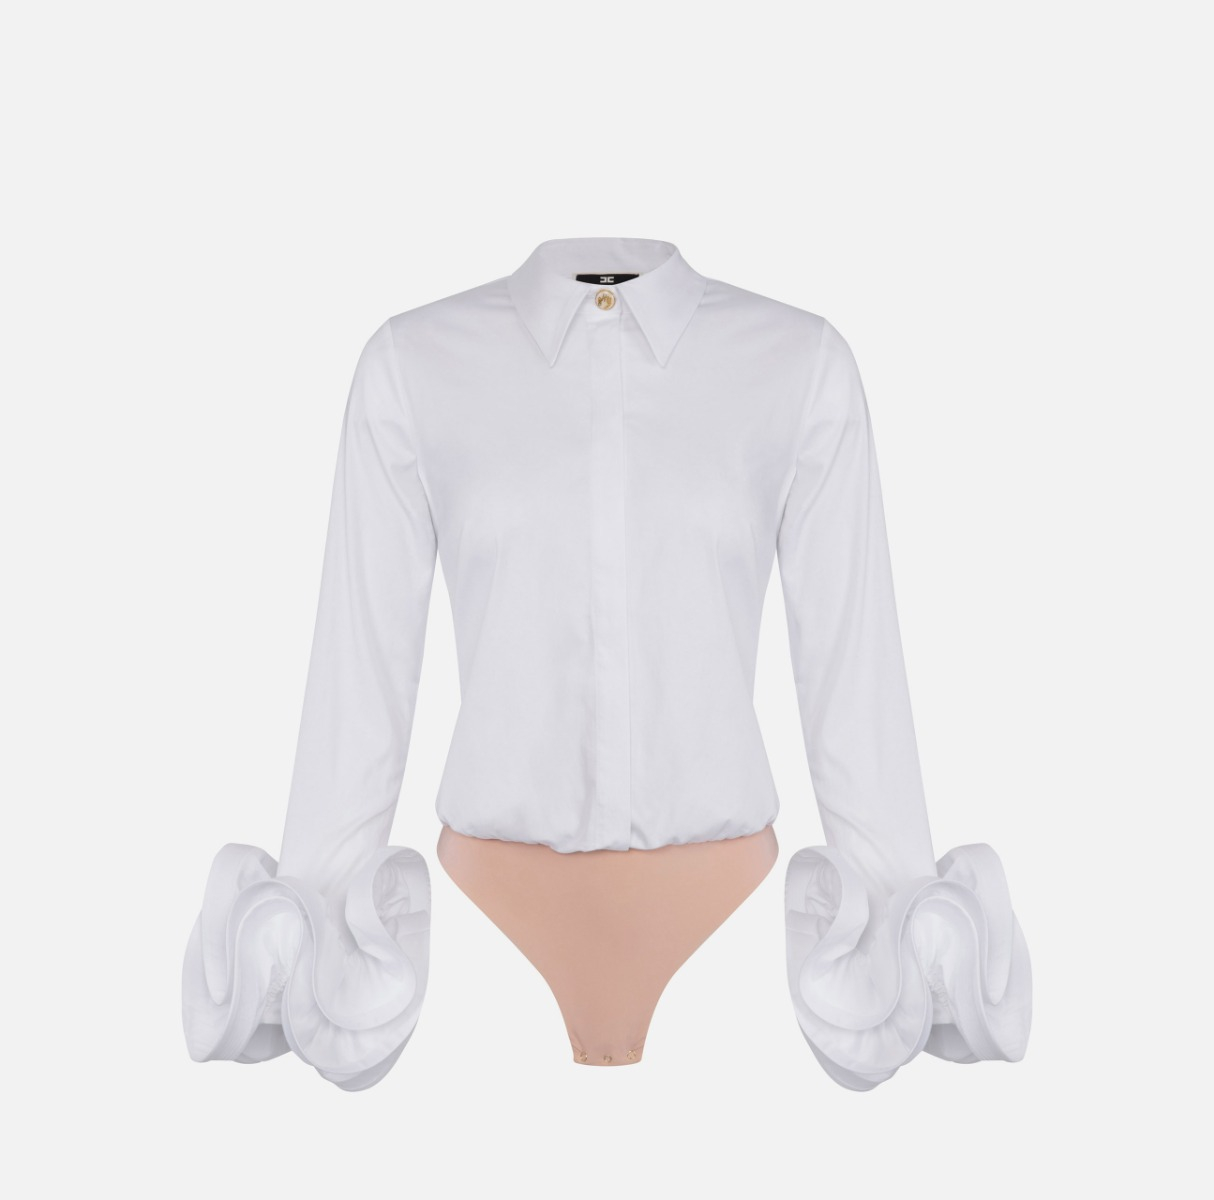 Bodysuit-style blouse in satin fabric with ruffled sleeves - Elisabetta Franchi